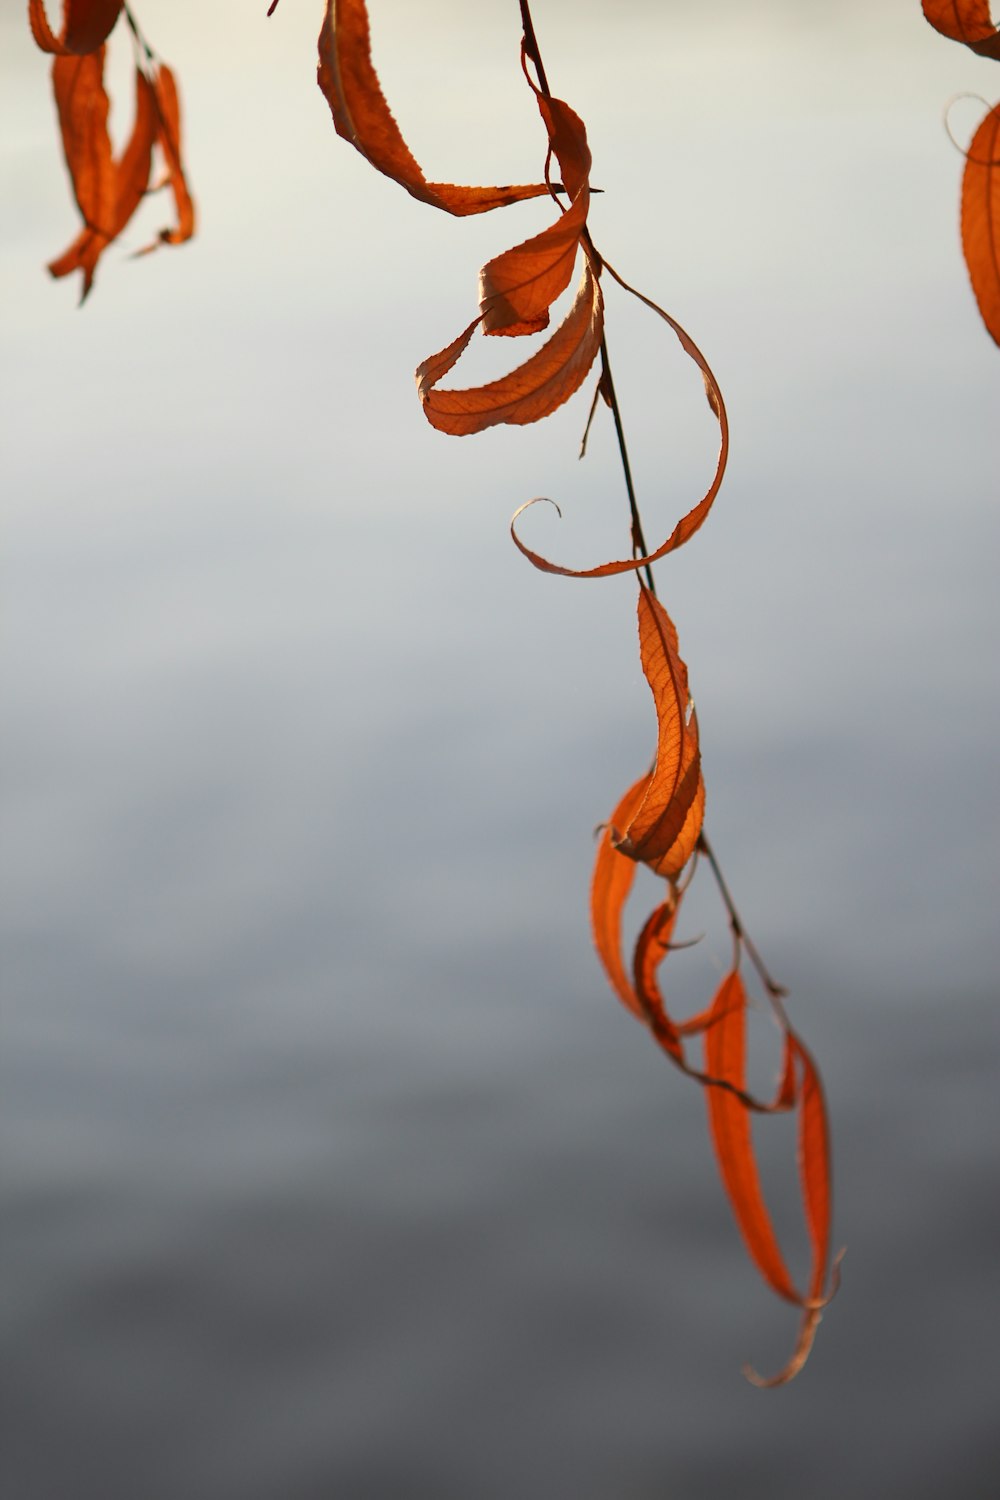 a close up of a branch with leaves hanging from it